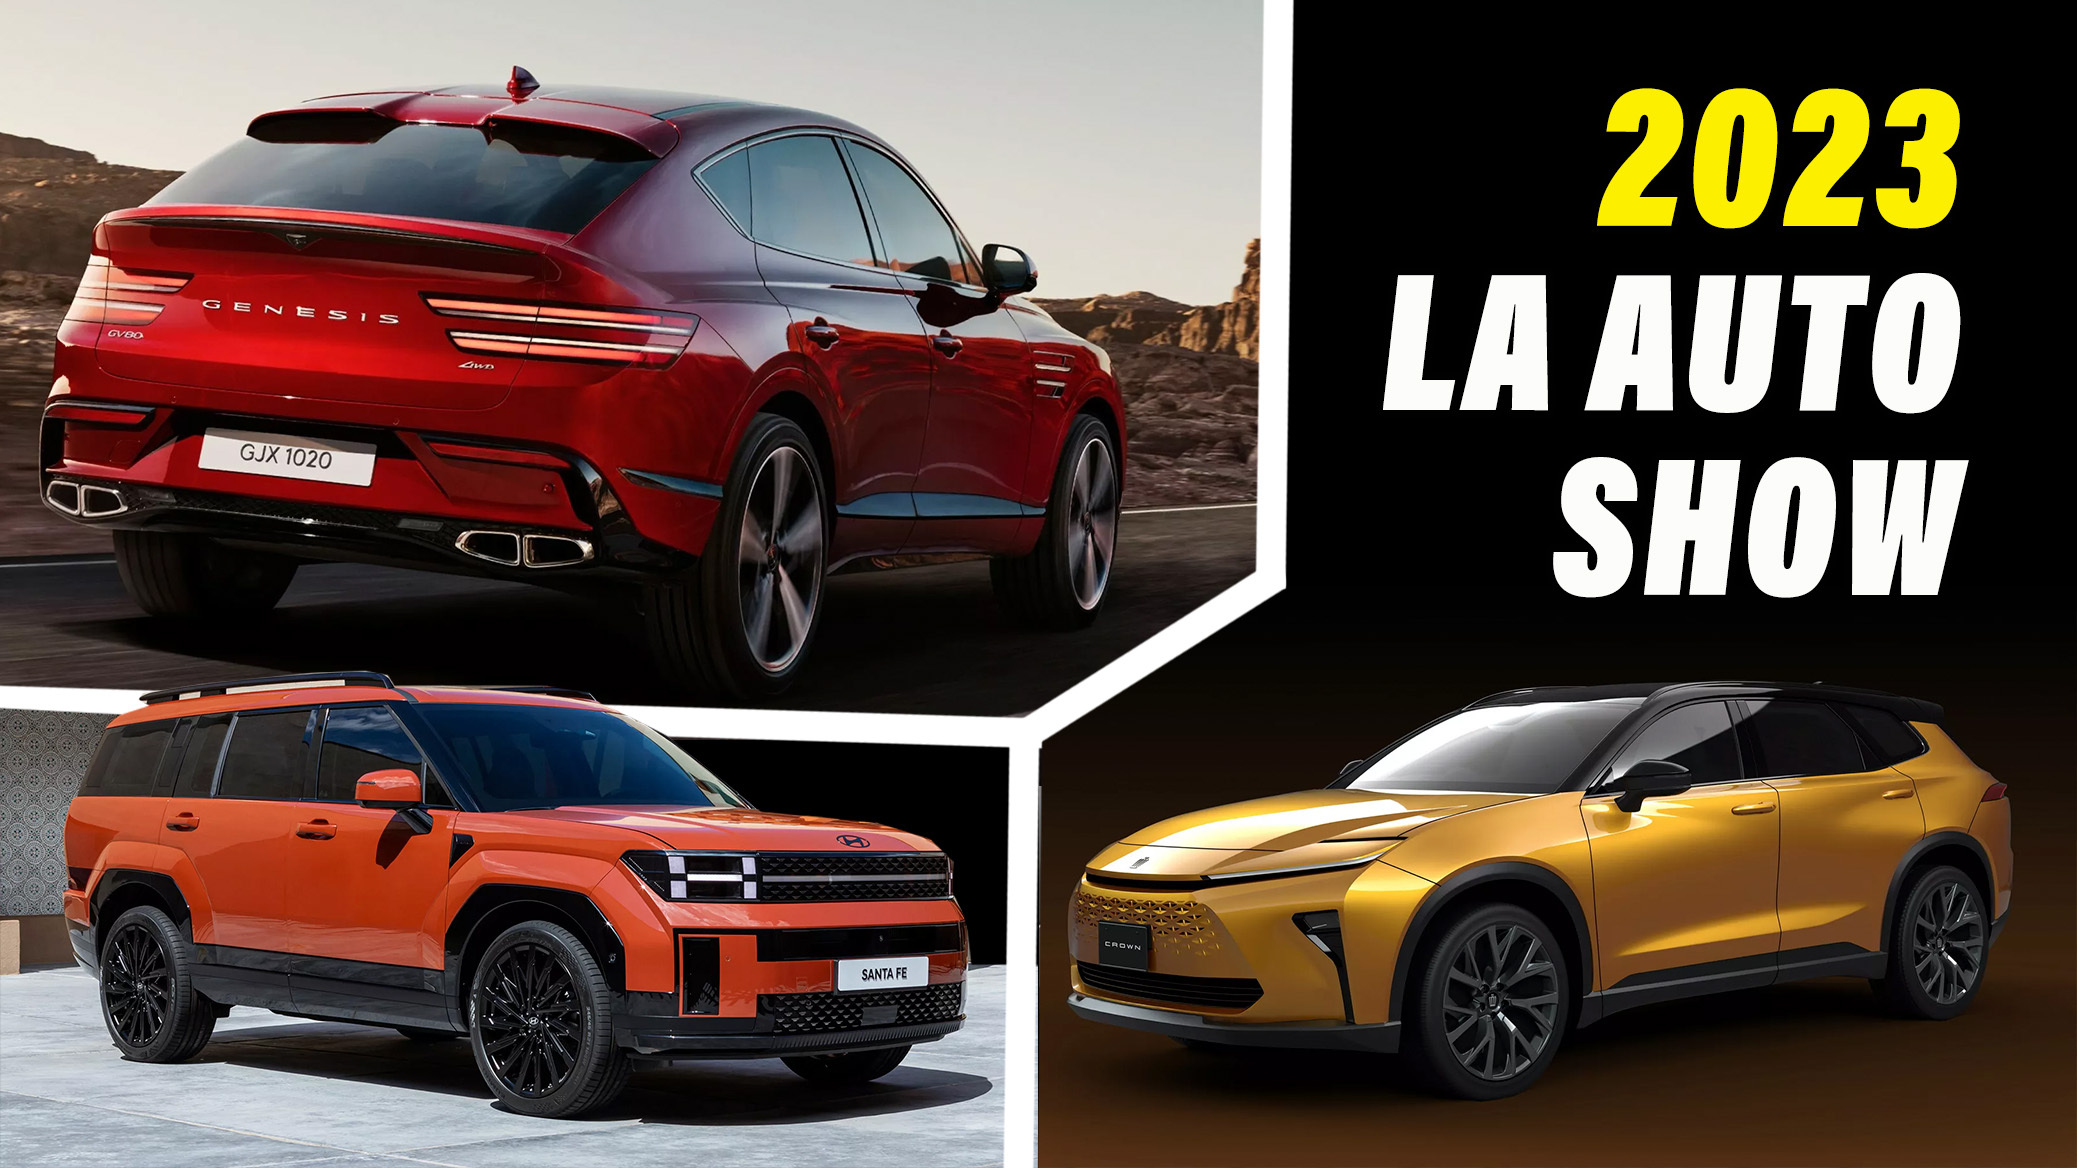 2023 LA Auto Show AZ Debuts From The Toyota Camry To The Lucid Gravity